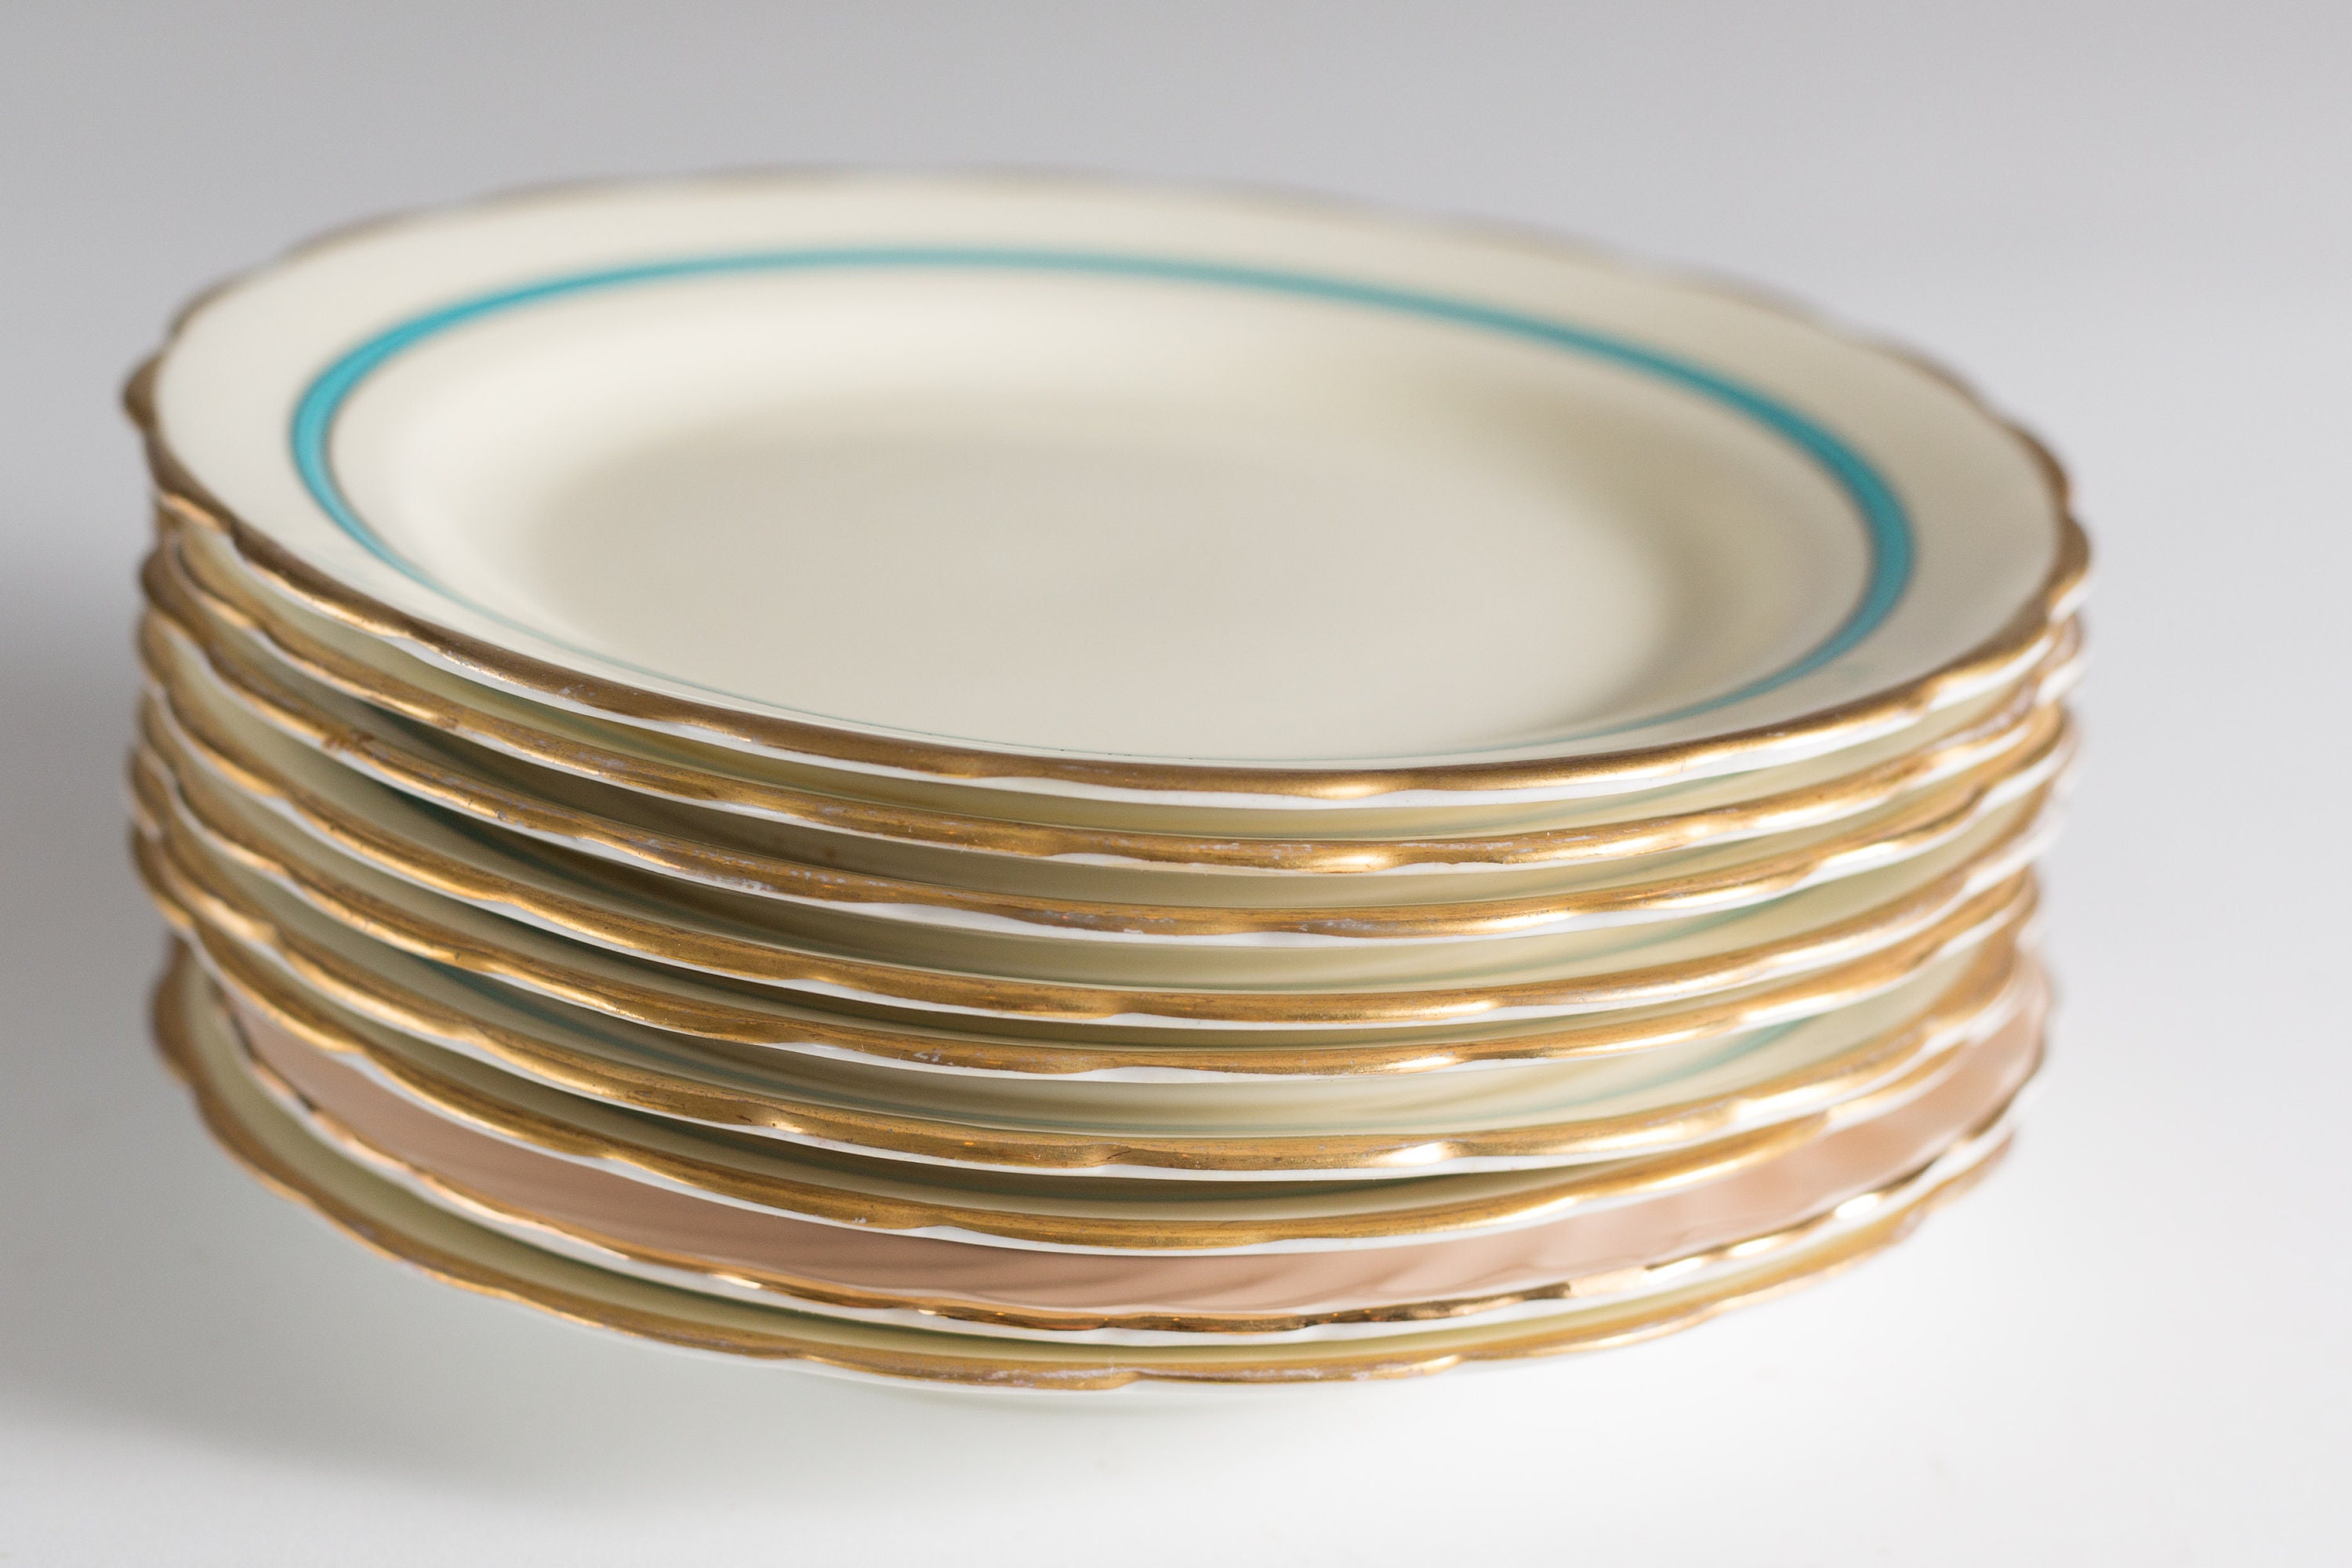 8 New Chelsea Staffs Side Plates - Blue, Gold and White Antique Bread Which Side Is The Bread Plate On